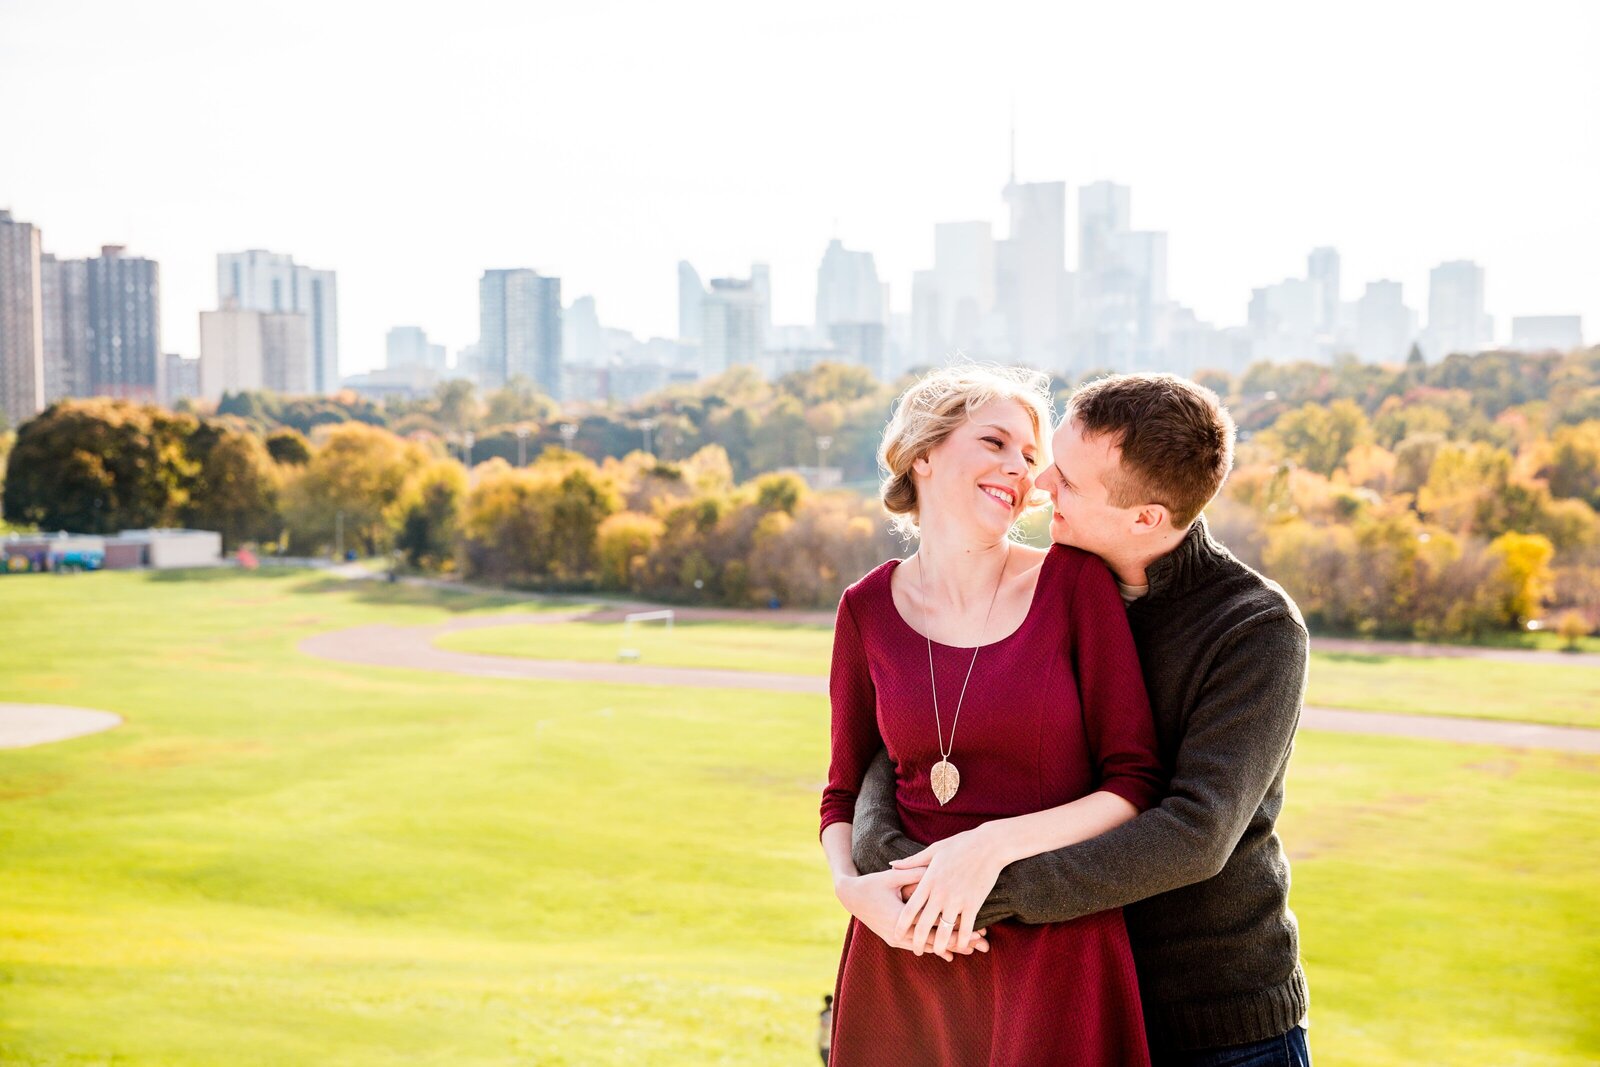 outdoor_photography_locations_toronto_engagement_photographers-3-min